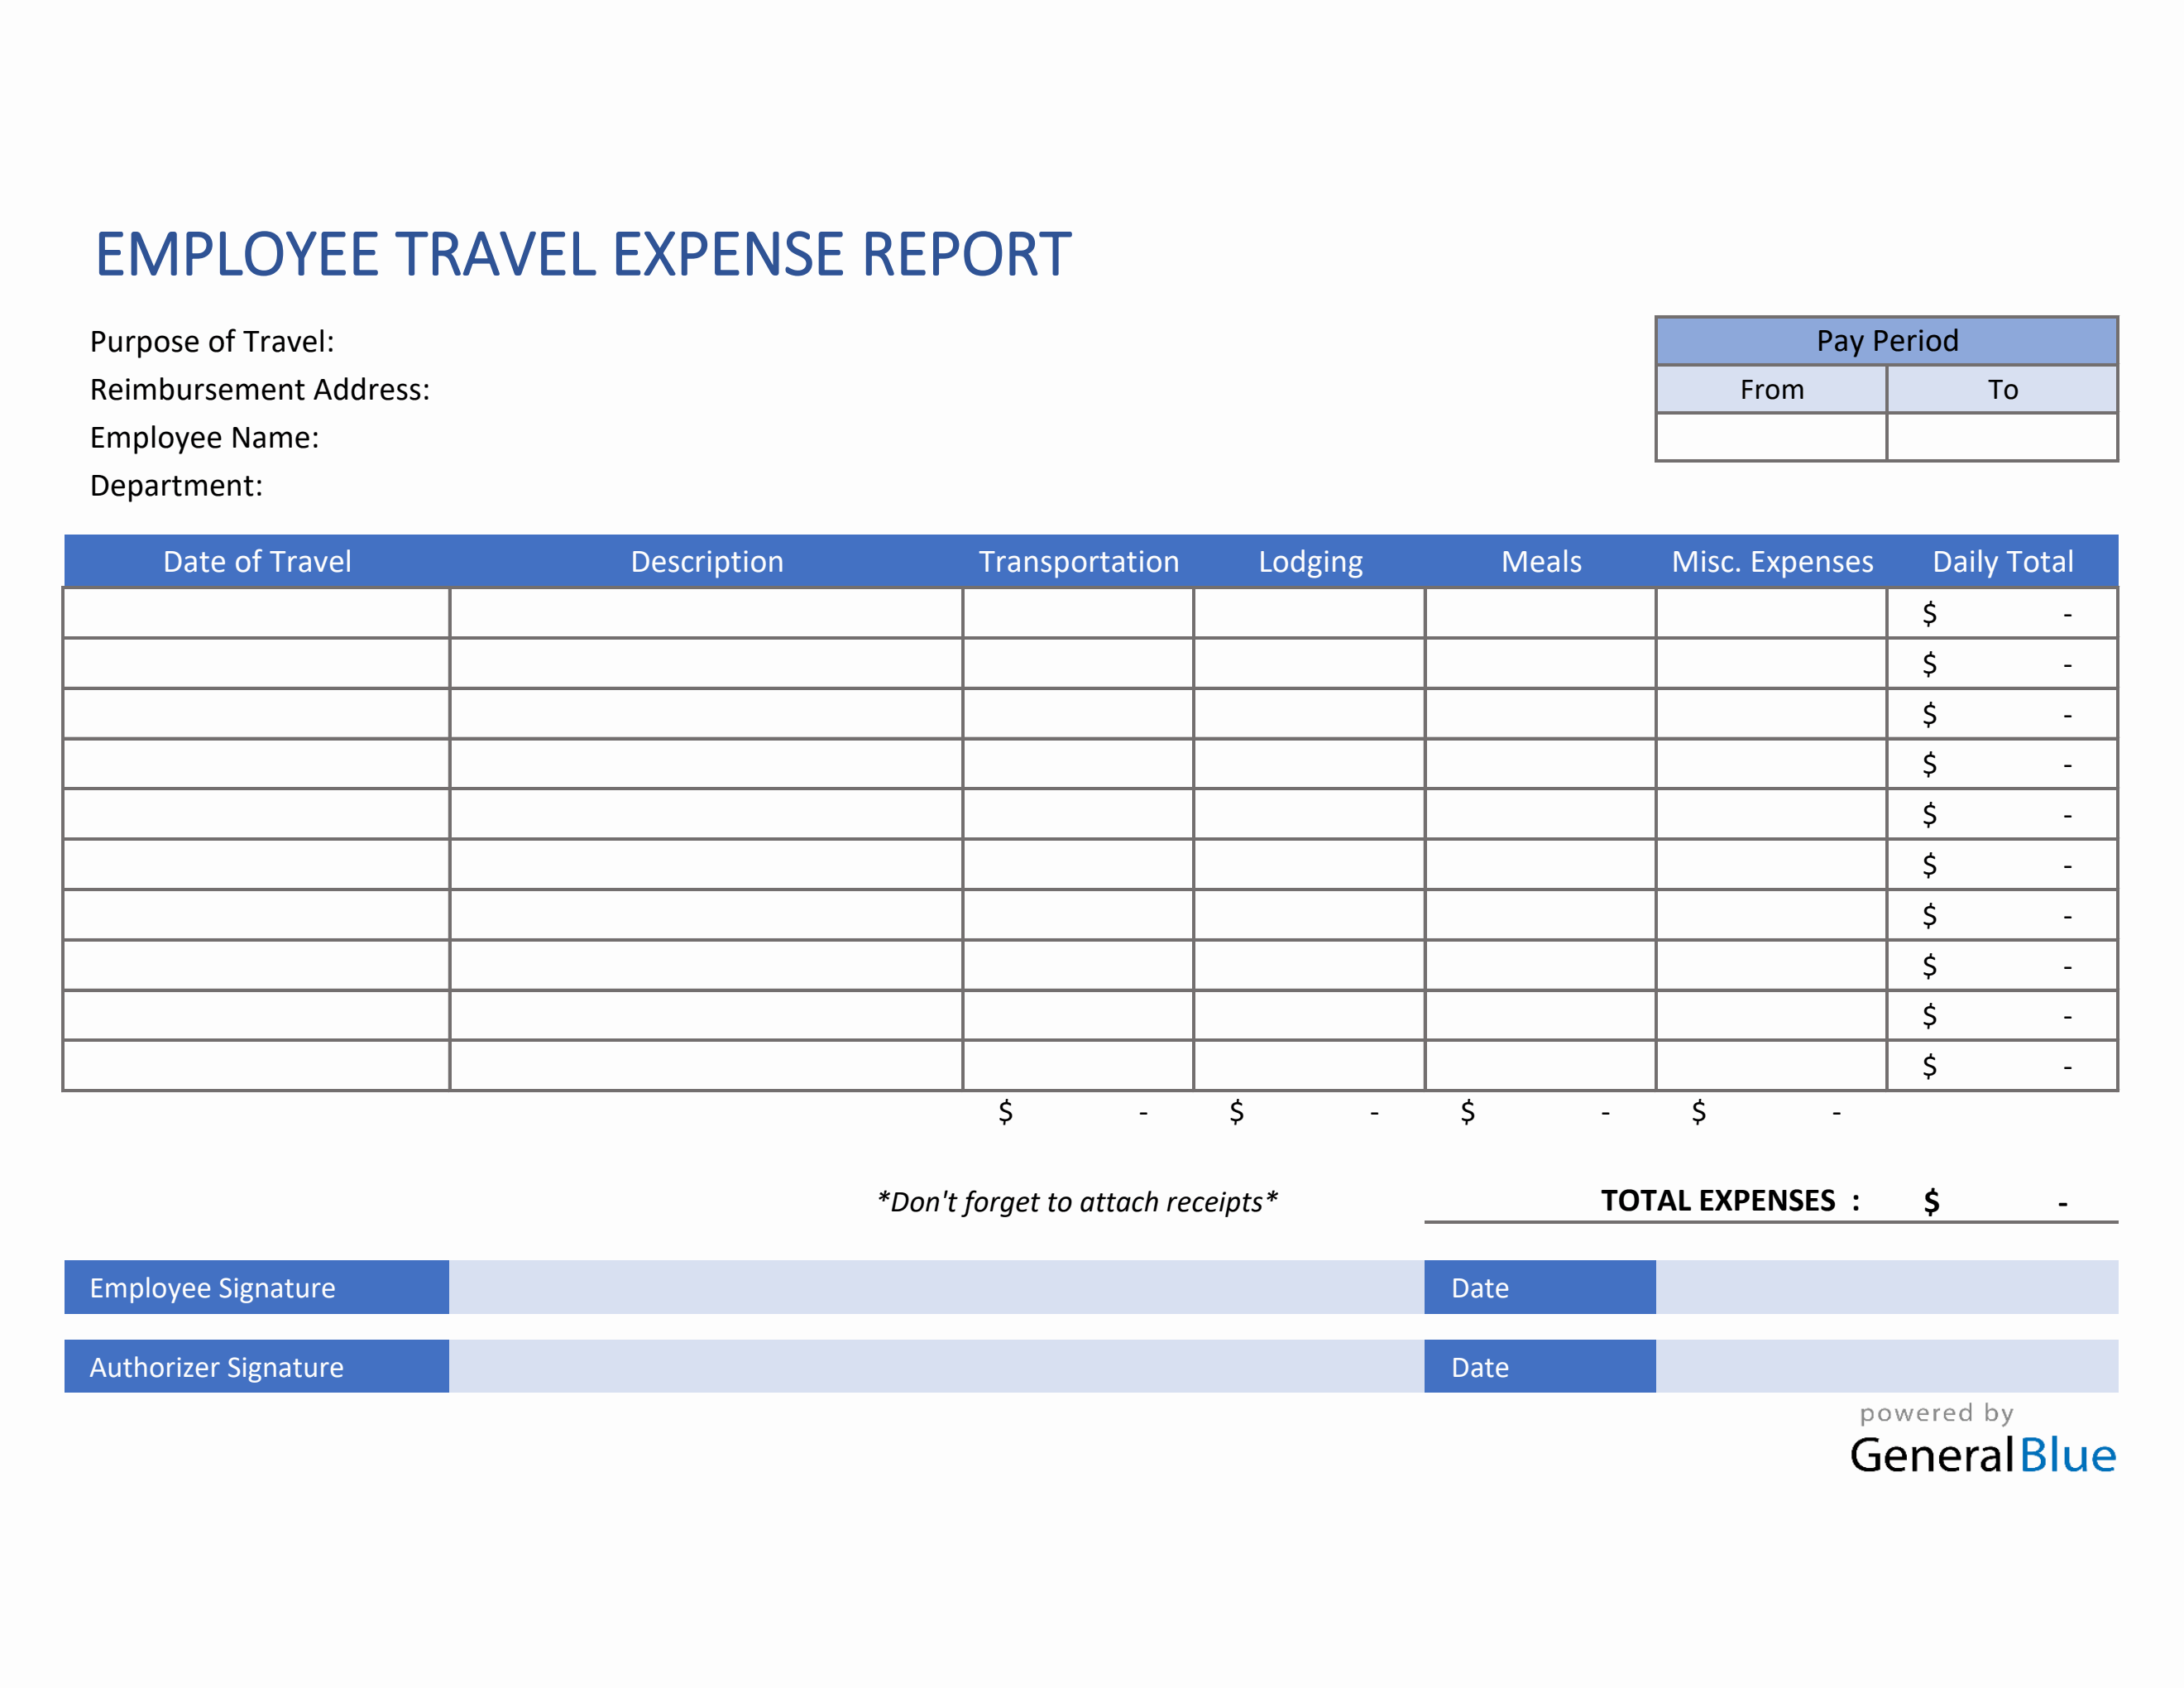 Employee Travel Expense Report Template in Excel Within Expense Report Template Xls